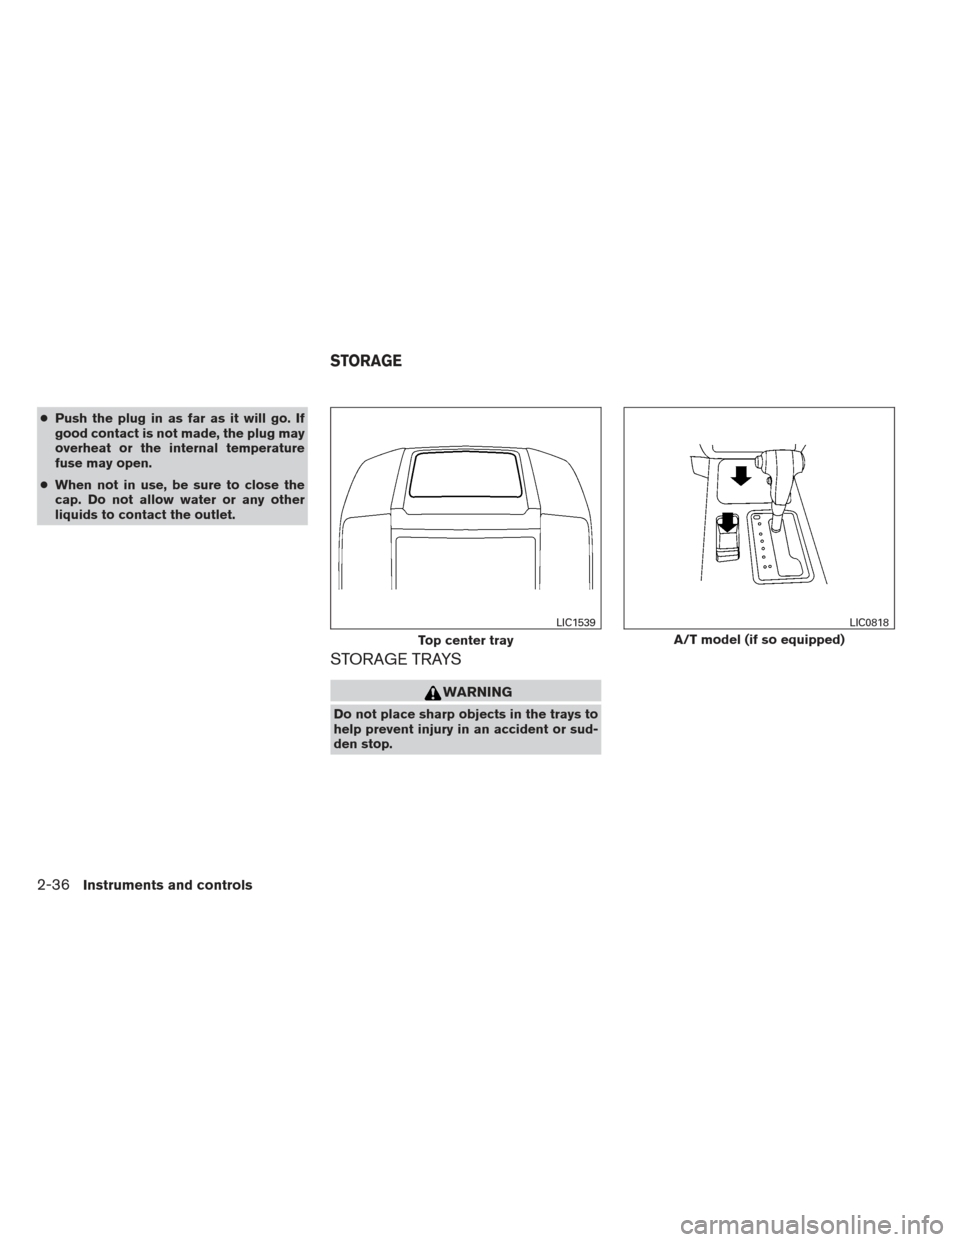 NISSAN XTERRA 2012 N50 / 2.G Owners Manual ●Push the plug in as far as it will go. If
good contact is not made, the plug may
overheat or the internal temperature
fuse may open.
● When not in use, be sure to close the
cap. Do not allow wate